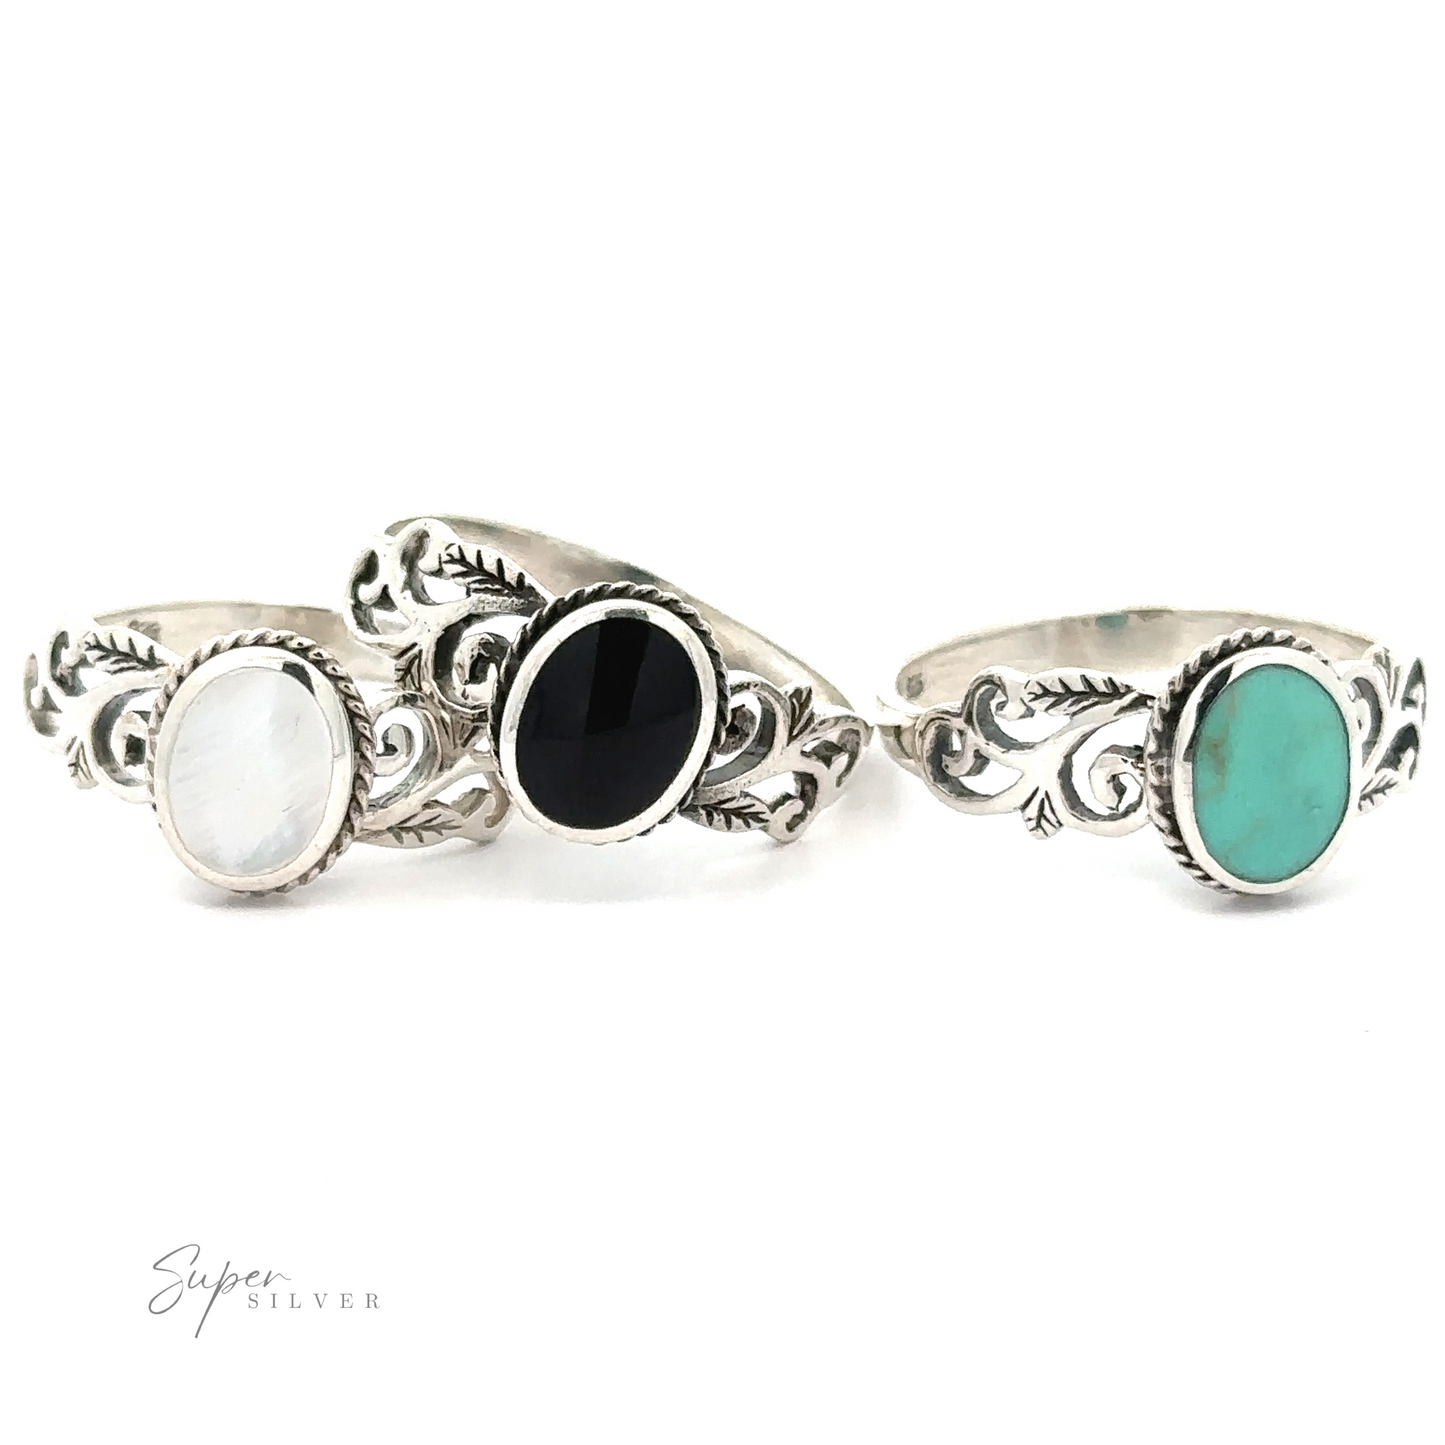 Three Oval Inlaid Rings with Swirls and Leaf Detailing featuring black and turquoise stones.